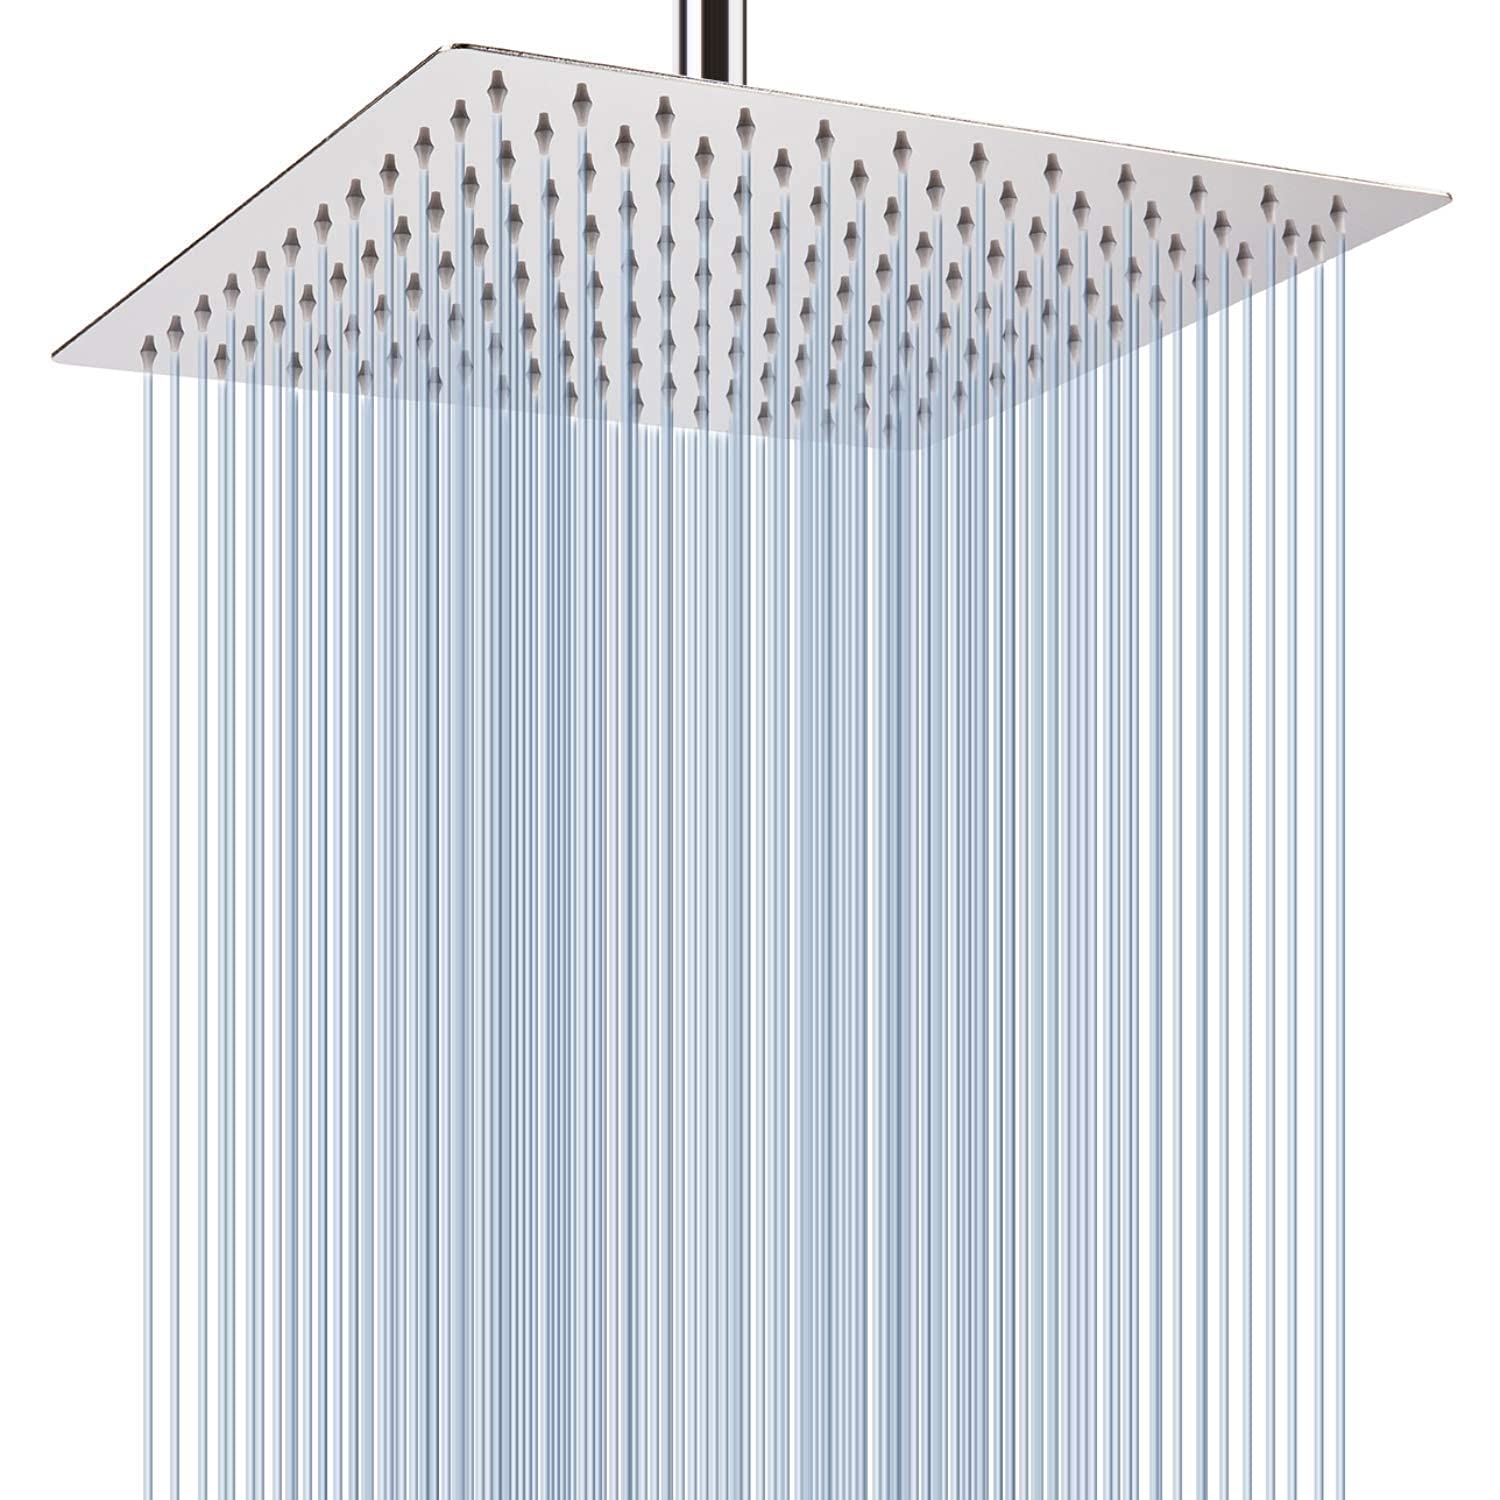 Voolan Rain Shower Head - High Flow Large Rainfall Shower Heads Made of Stainless Steel - Waterfall Bathroom Square Showerhead - Ceiling or Wall Mount (12" Chrome)